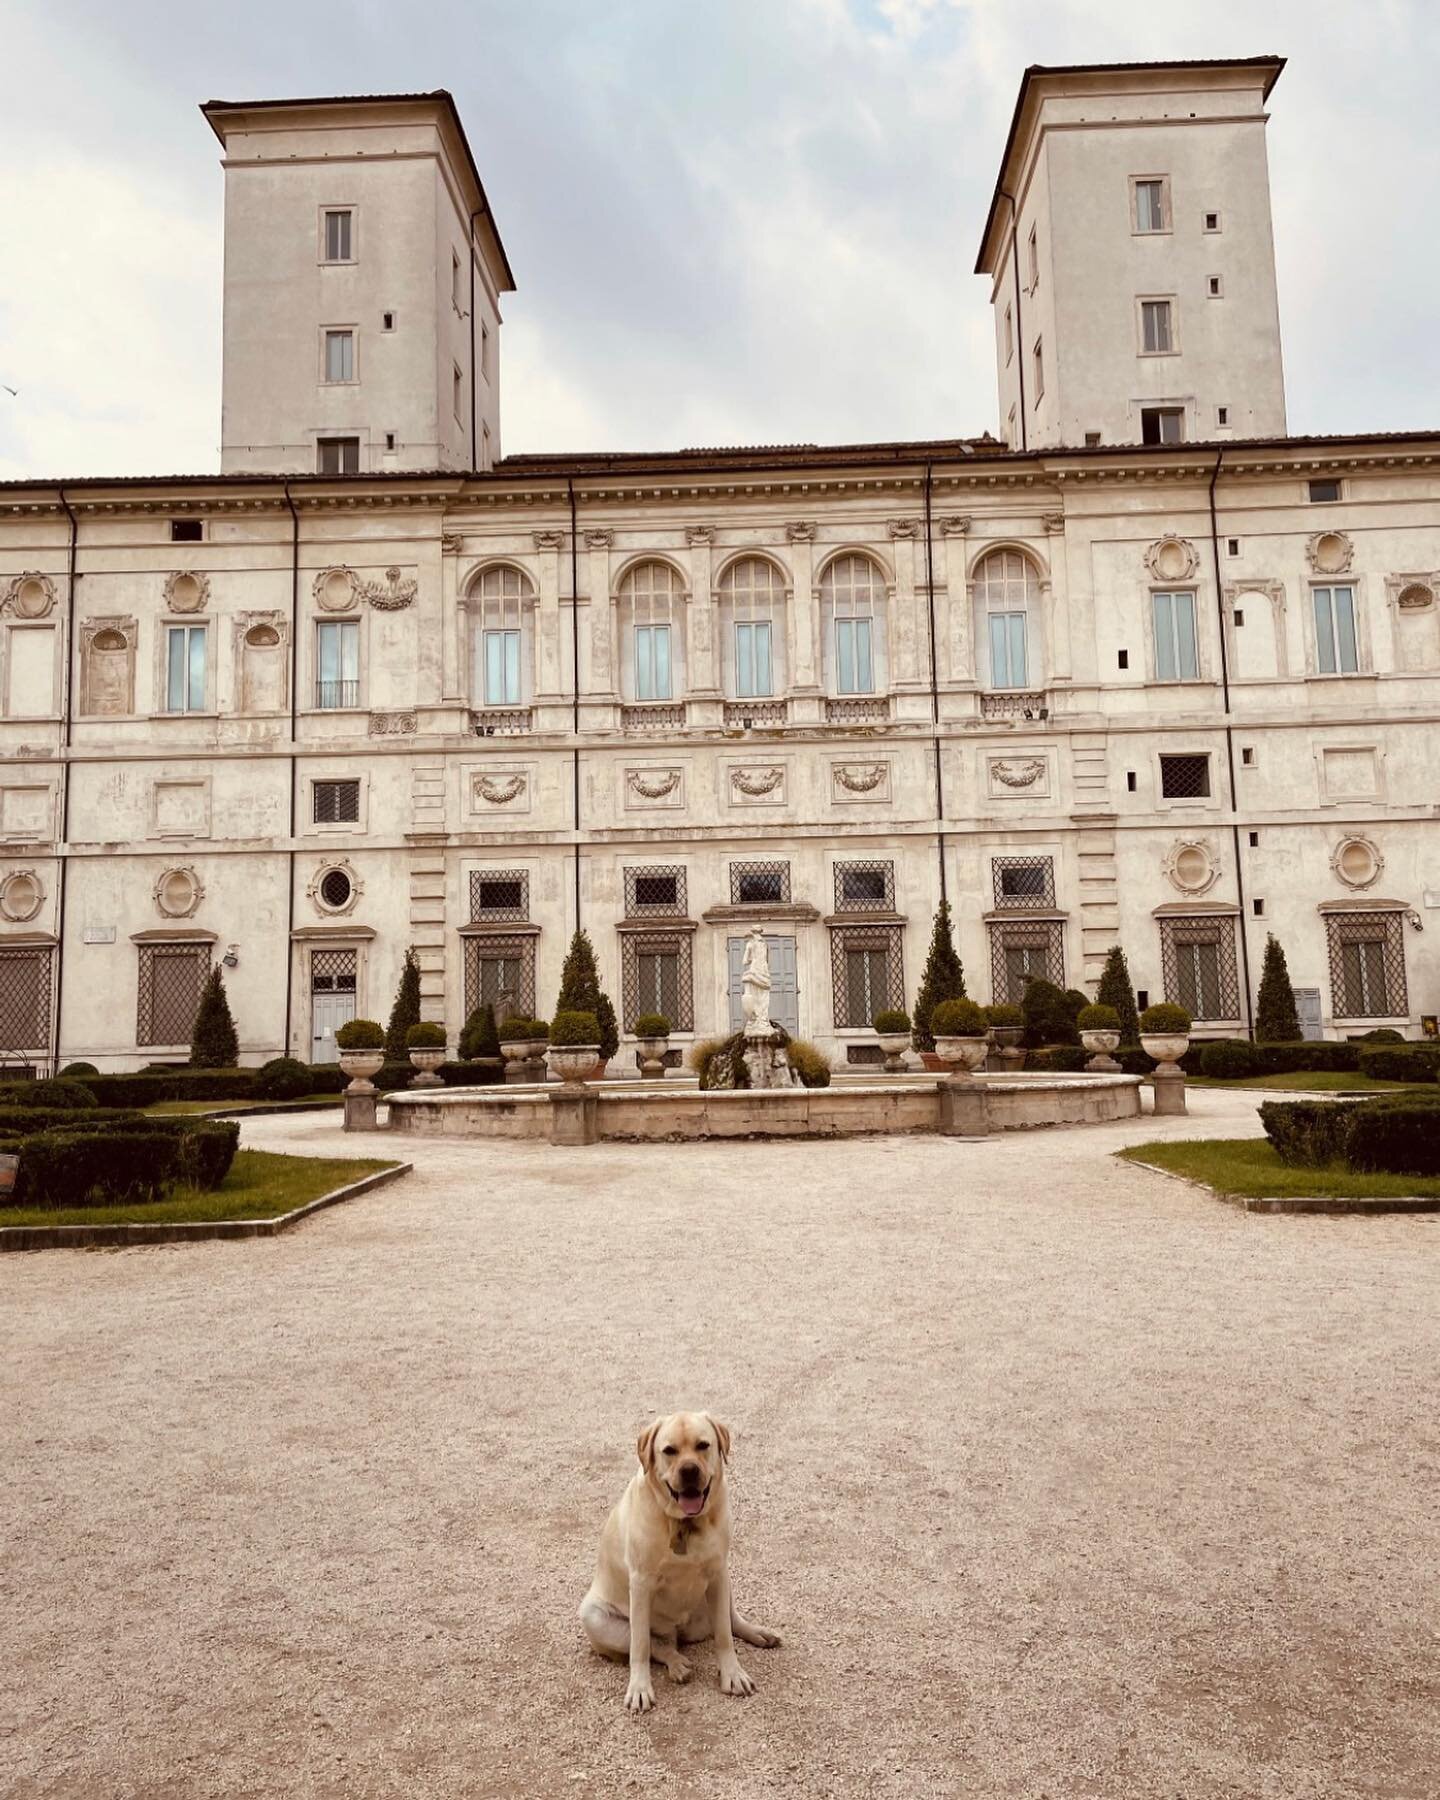 Roman Ruminations: Pandemic Pups in The Eternal City. Please read my latest in Pet Therapy Notes on Medium, https://link.medium.com/G9Aixhz84lb. Link also in bio.